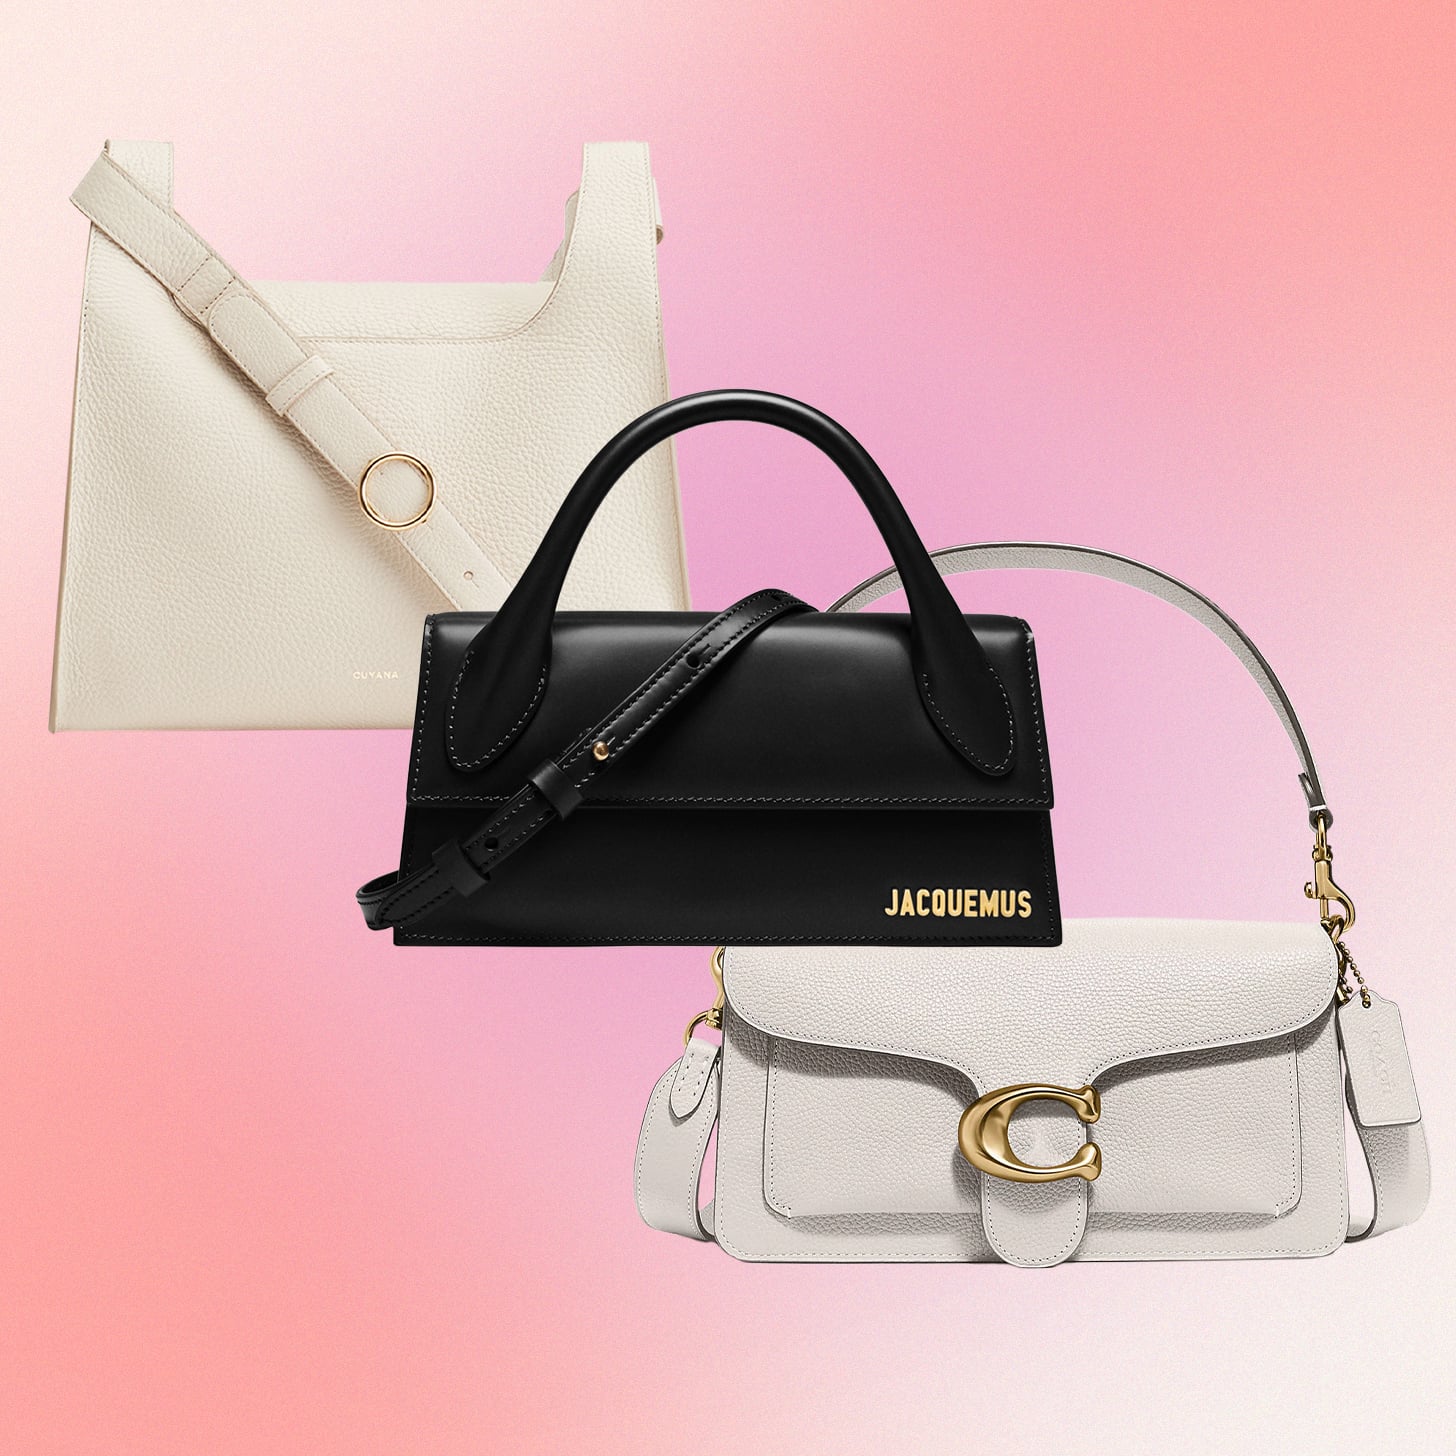 10 Best Designer Crossbody Bags to Shop in 2023, According to Experts